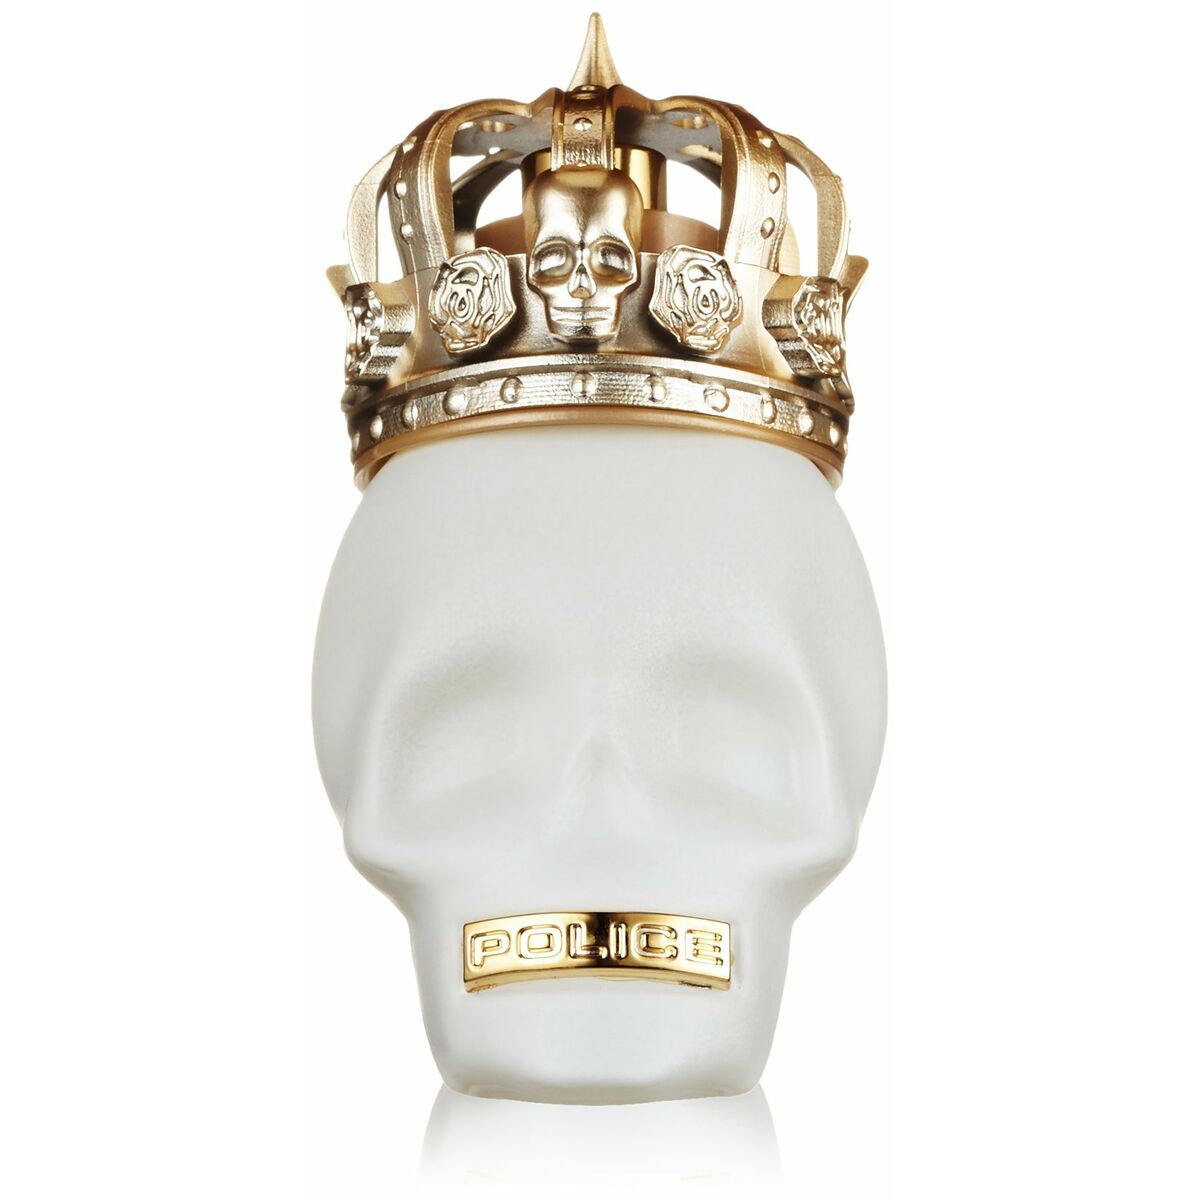 Damesparfum Police EDP To Be The Queen 40 ml